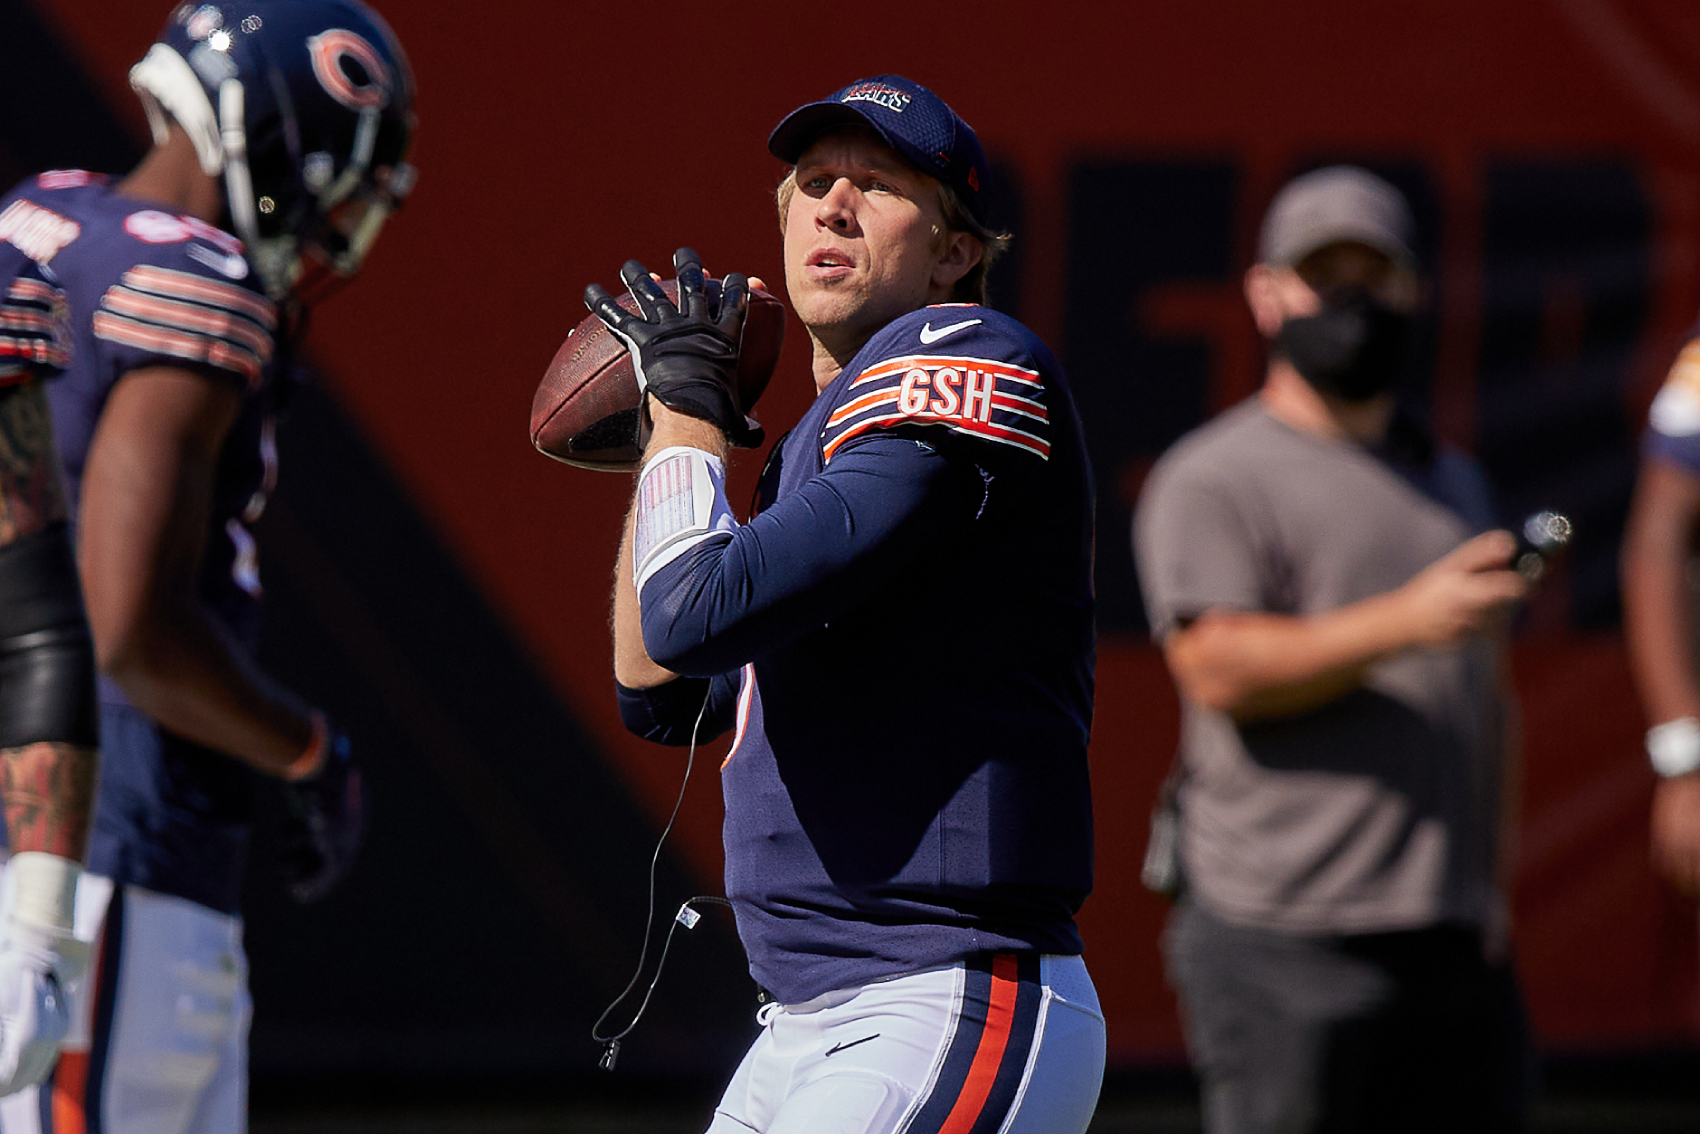 Nicks Foles is starting for the Chicago Bears in Week 4. However, the Bears are choosing to start him at the absolute worst possible time.